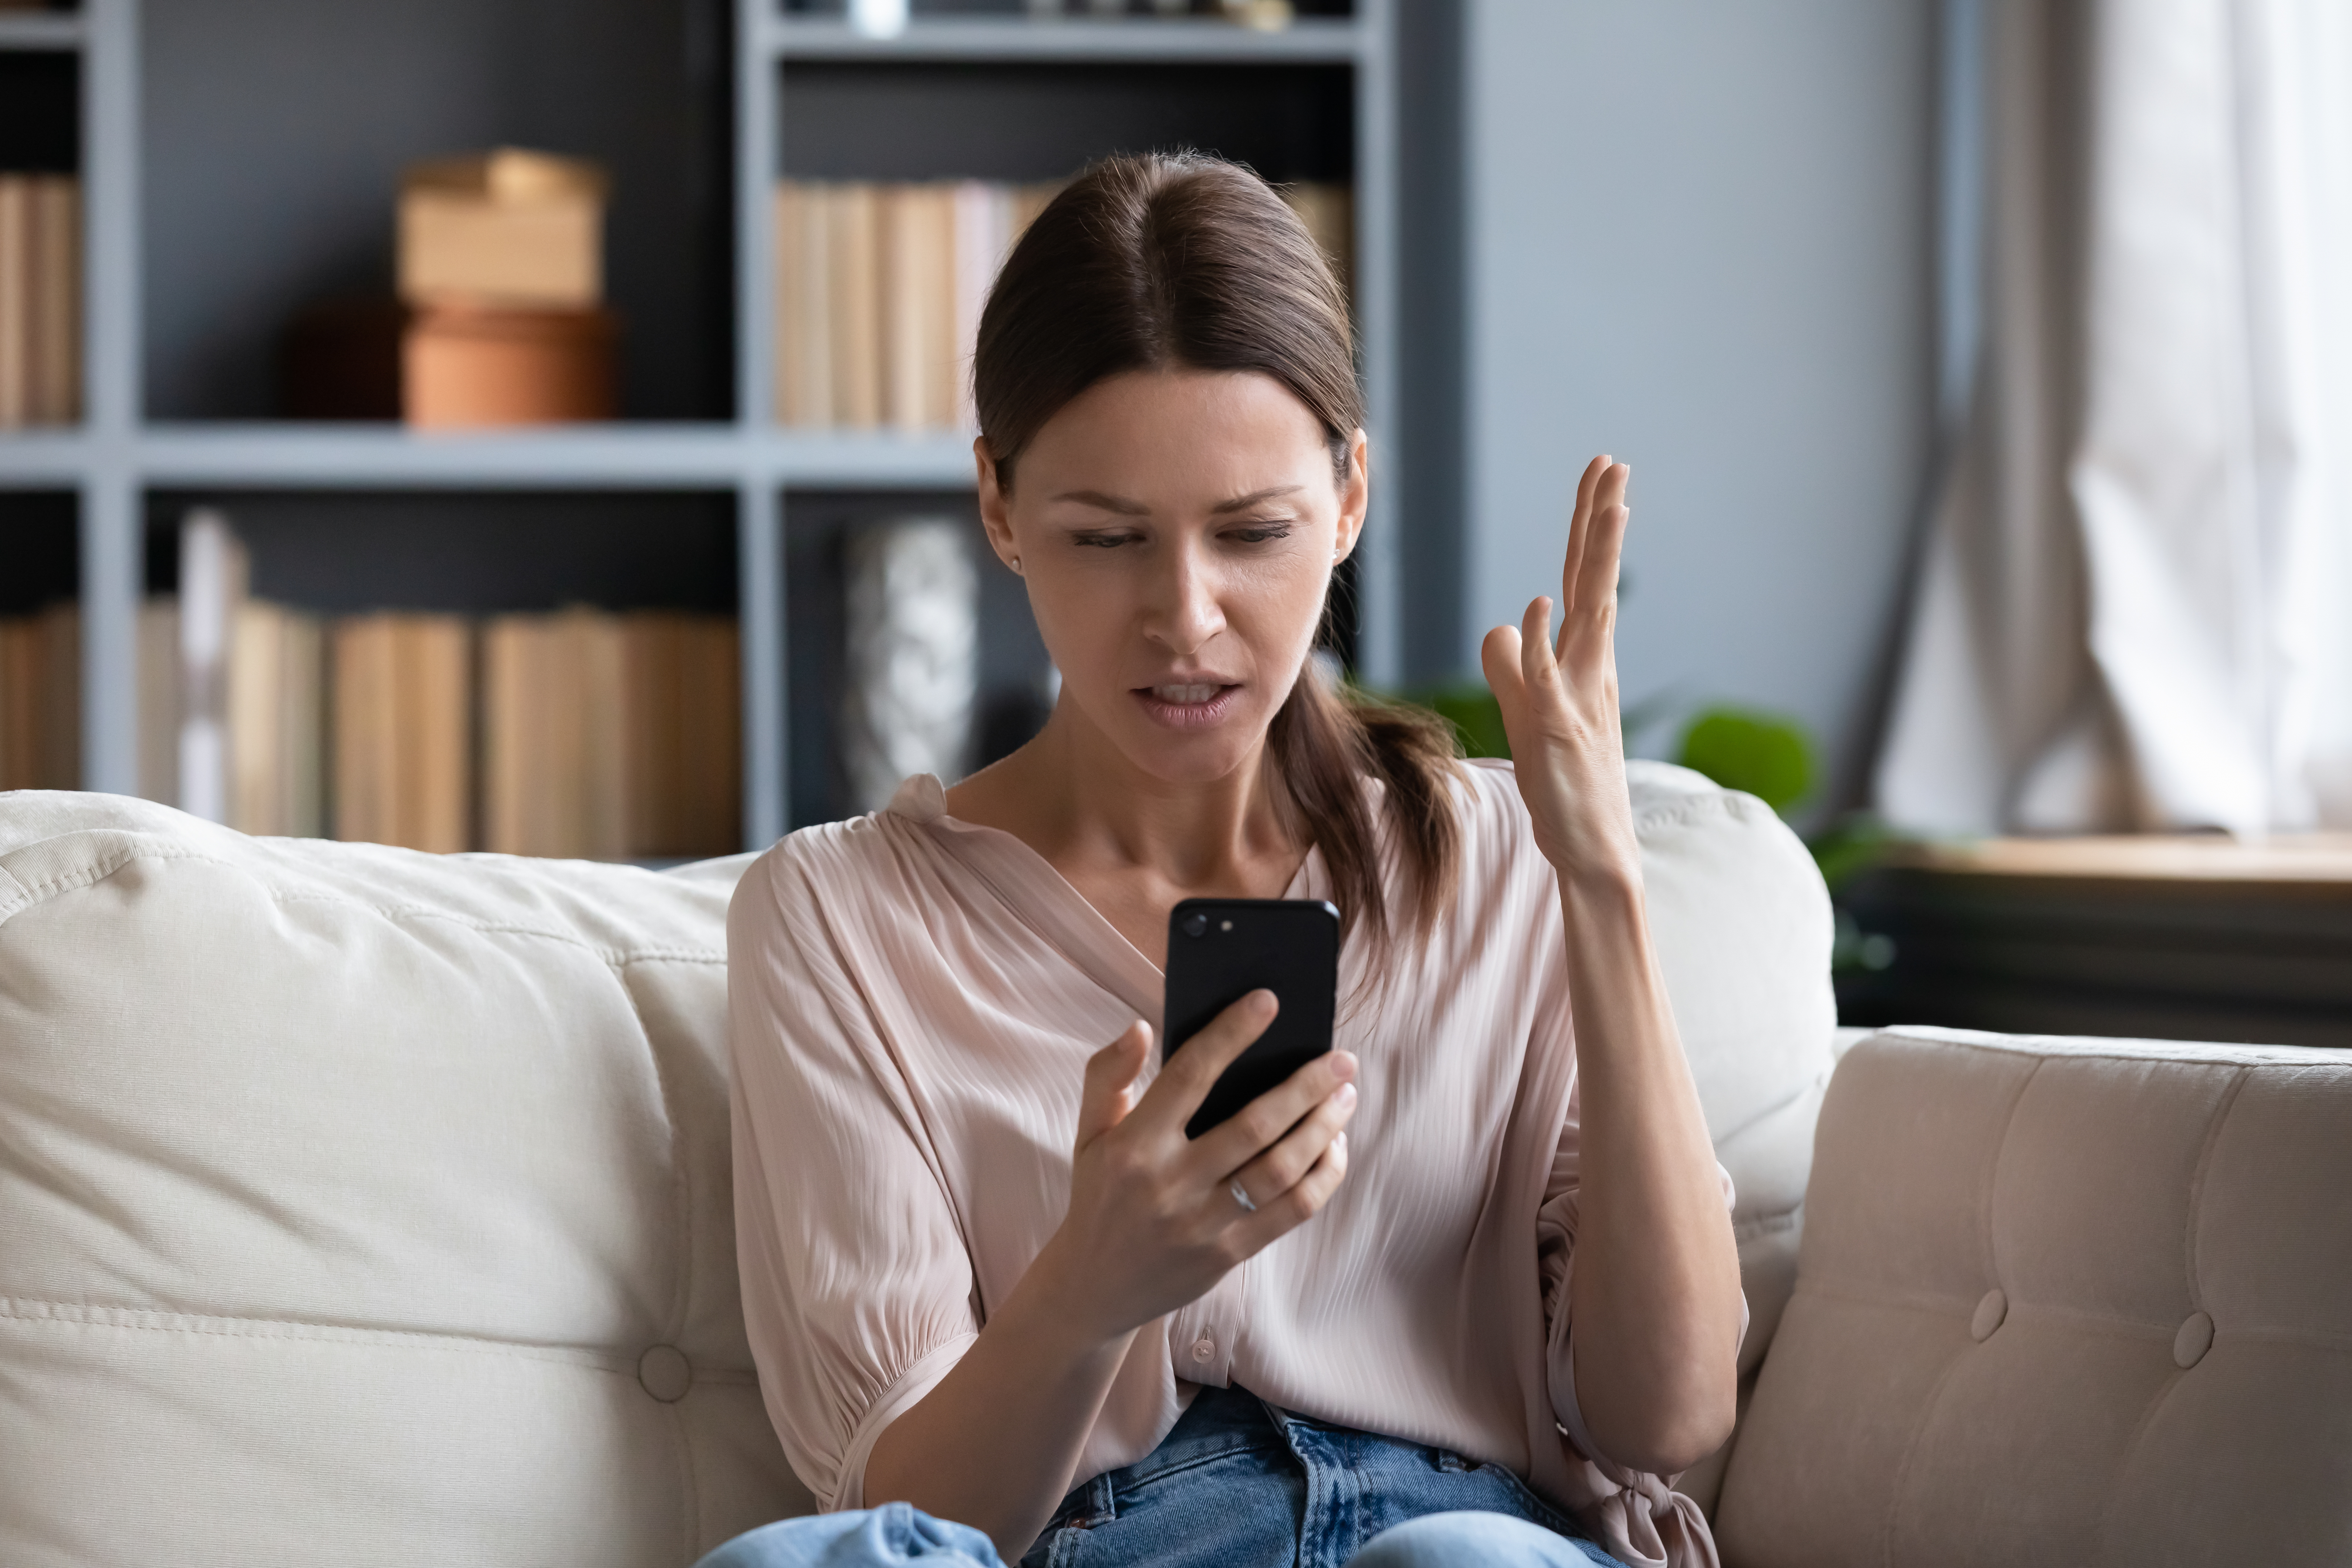 An annoyed woman looking at her phone | Source: Shutterstock